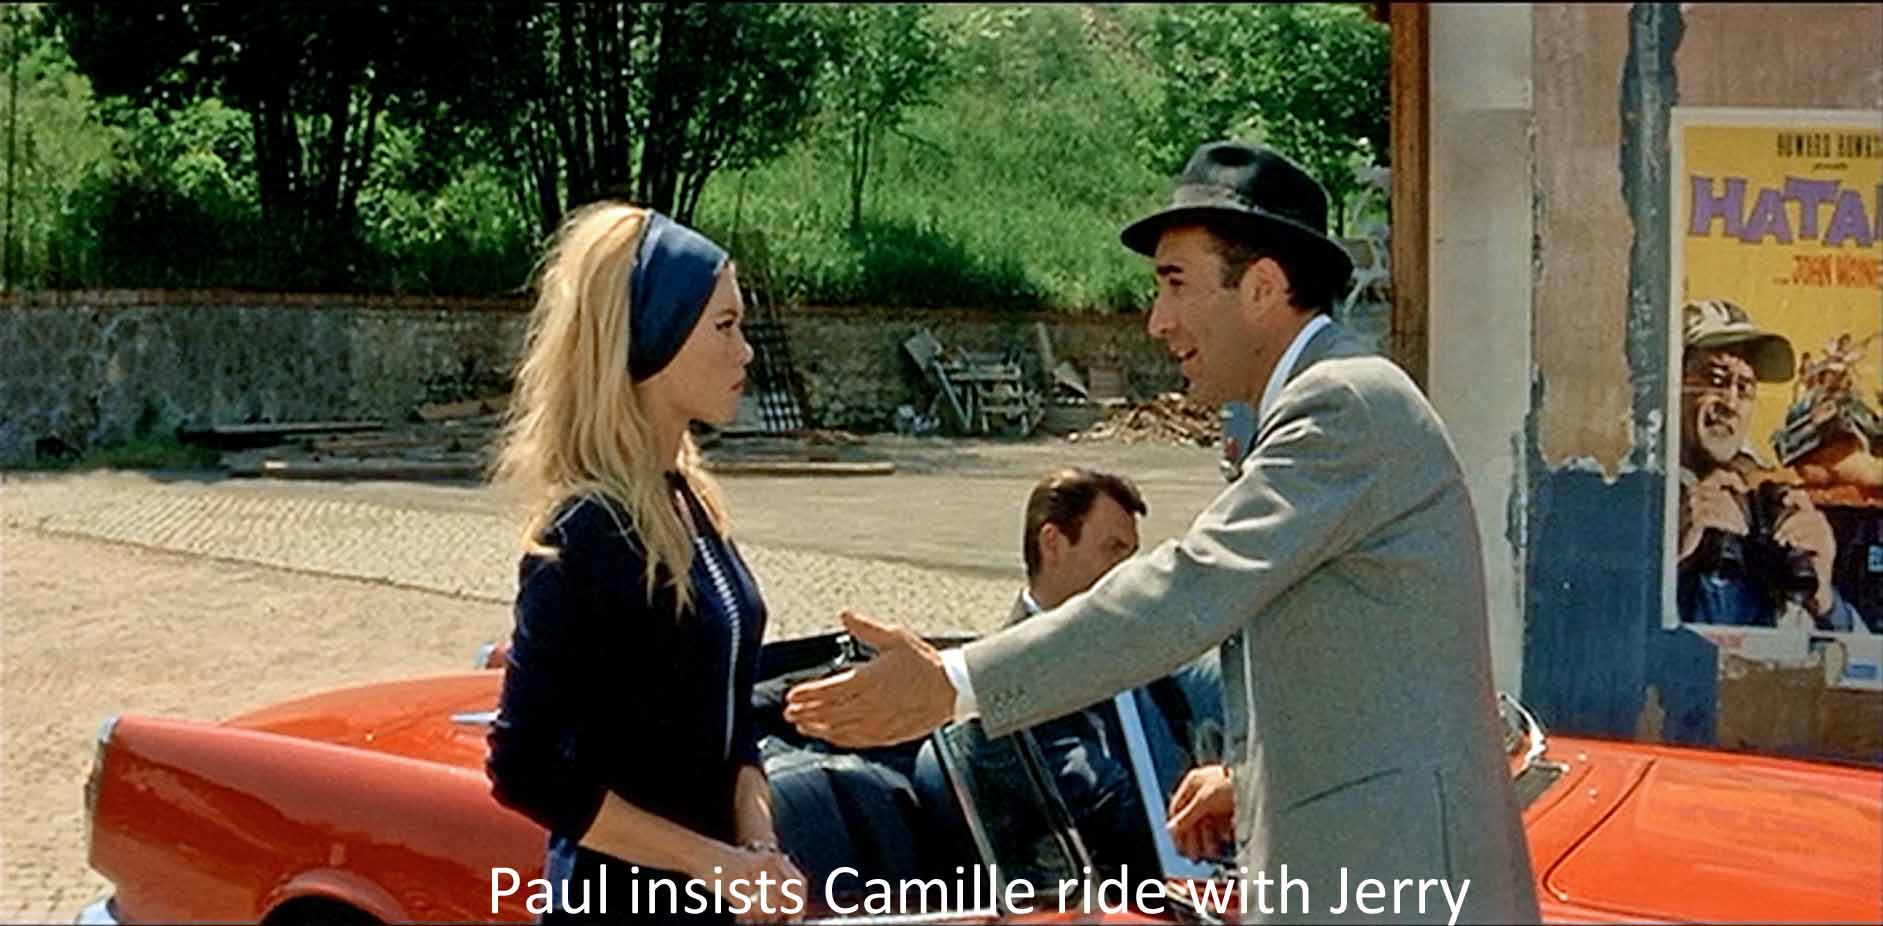 Paul insists Camille ride with Jerry